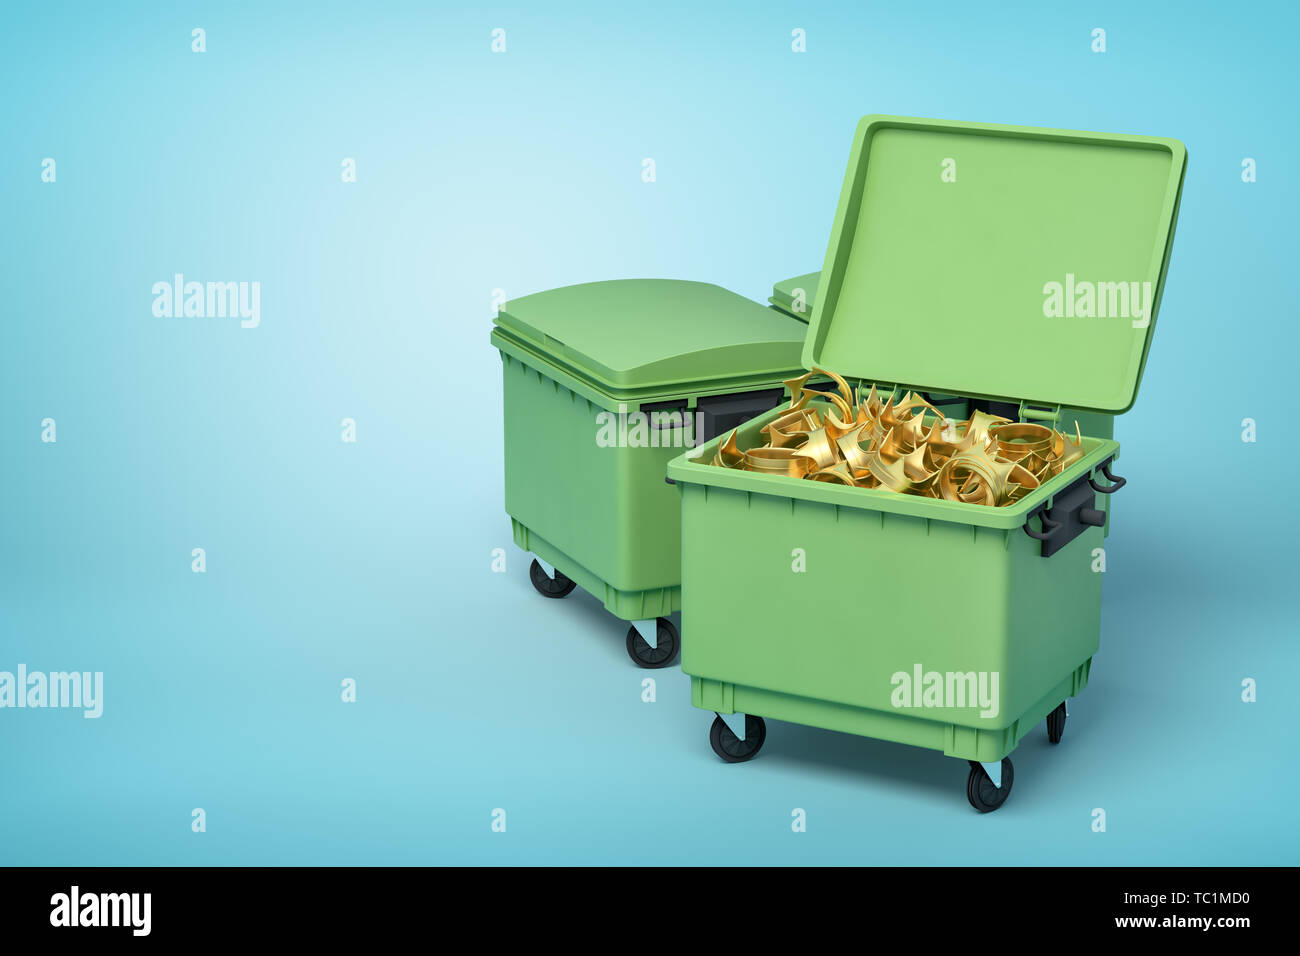 3d rendering of green trash bins with golden crowns inside on blue background Stock Photo